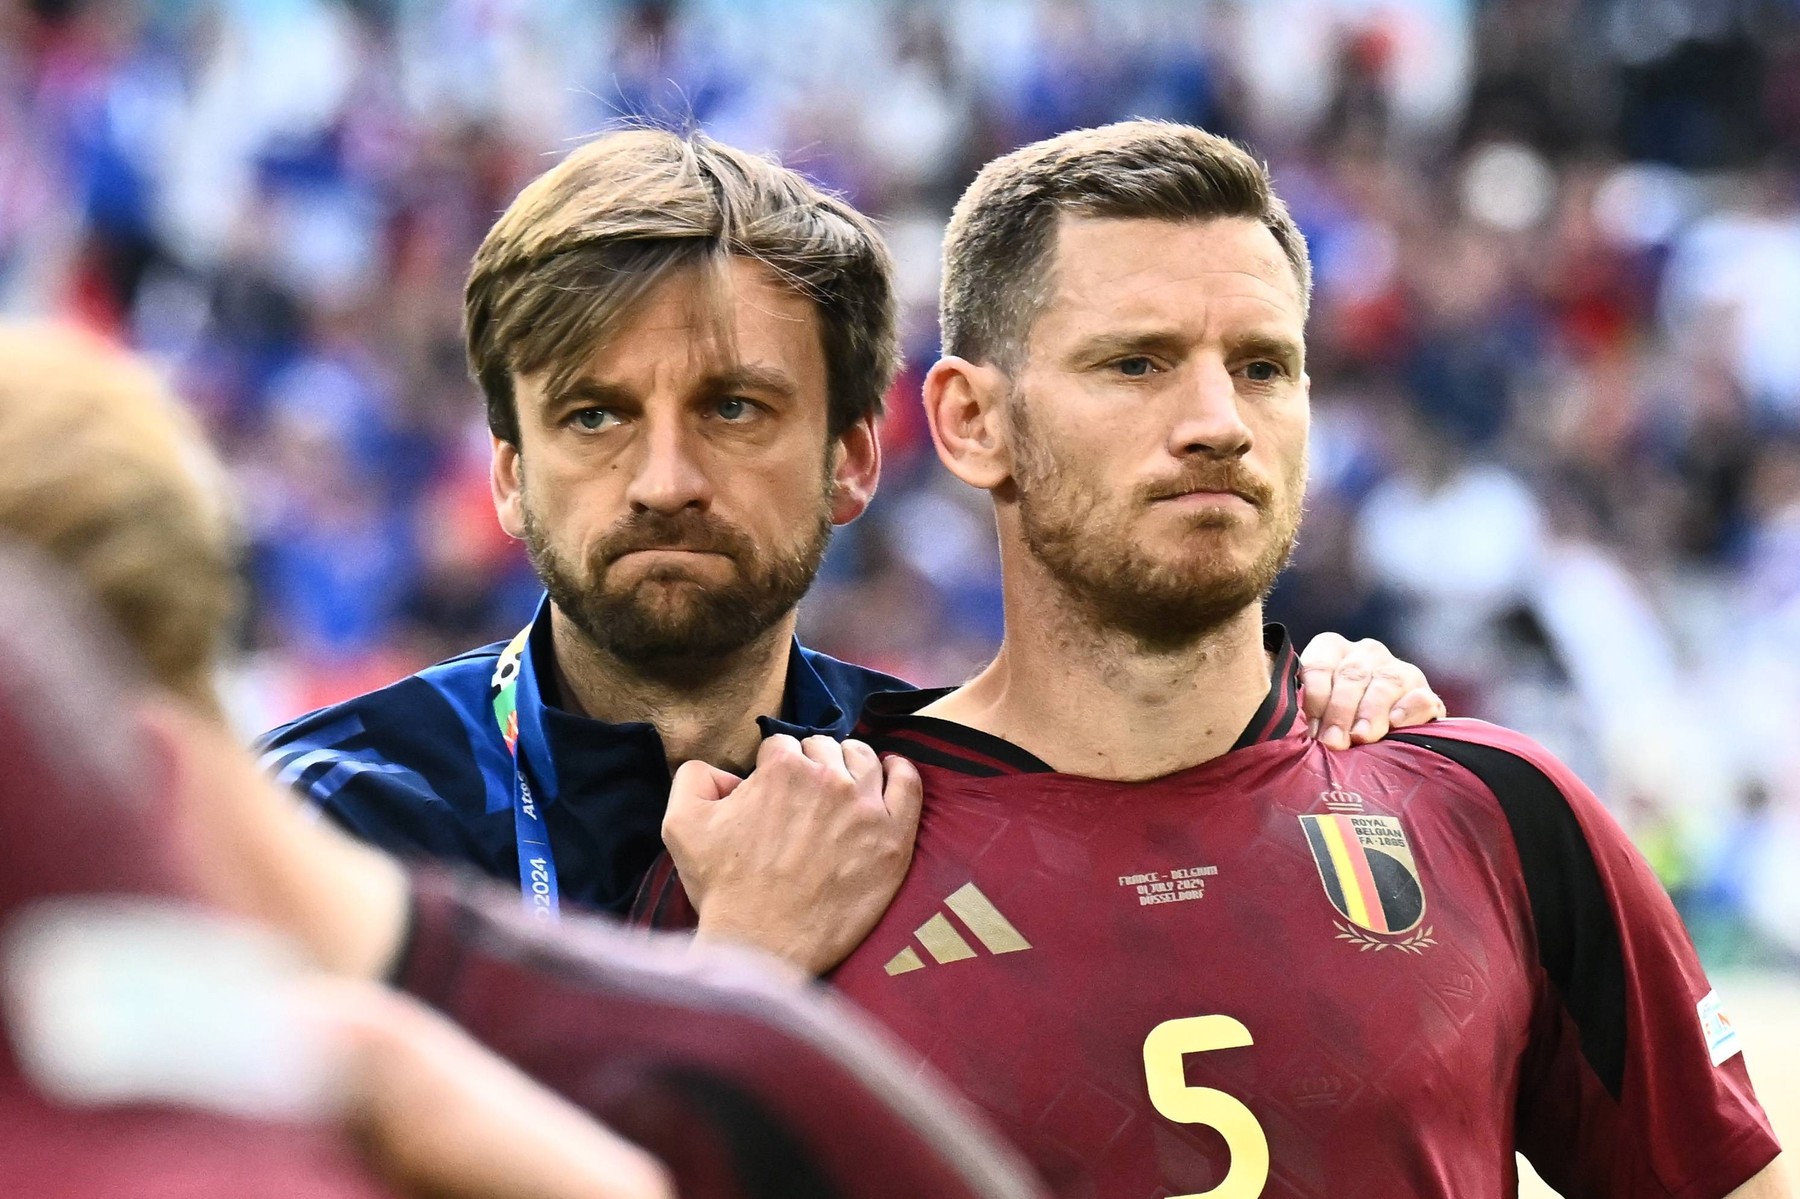 240701 EURO2024 FRANCE VS BELGIUM Jan Vertonghen 5 of Belgium looks dejected after a soccer game between the national teams of France, called les Bleus and Belgium, called the Red Devils in a round of 16 knock out game of the UEFA EURO, EM, Europameisterschaft,Fussball 2024 tournament , on Monday 1 July 2024 in Dusseldorf , Germany . photo isosport Maarten Straetemans Dusseldorf GERMANY Copyright: xx 471681,Image: 886355051, License: Rights-managed, Restrictions: PUBLICATIONxNOTxINxBELxUKxUSA, Credit images as "Profimedia/ IMAGO", Model Release: no, Credit line: IMAGO / imago sportfotodienst / Profimedia